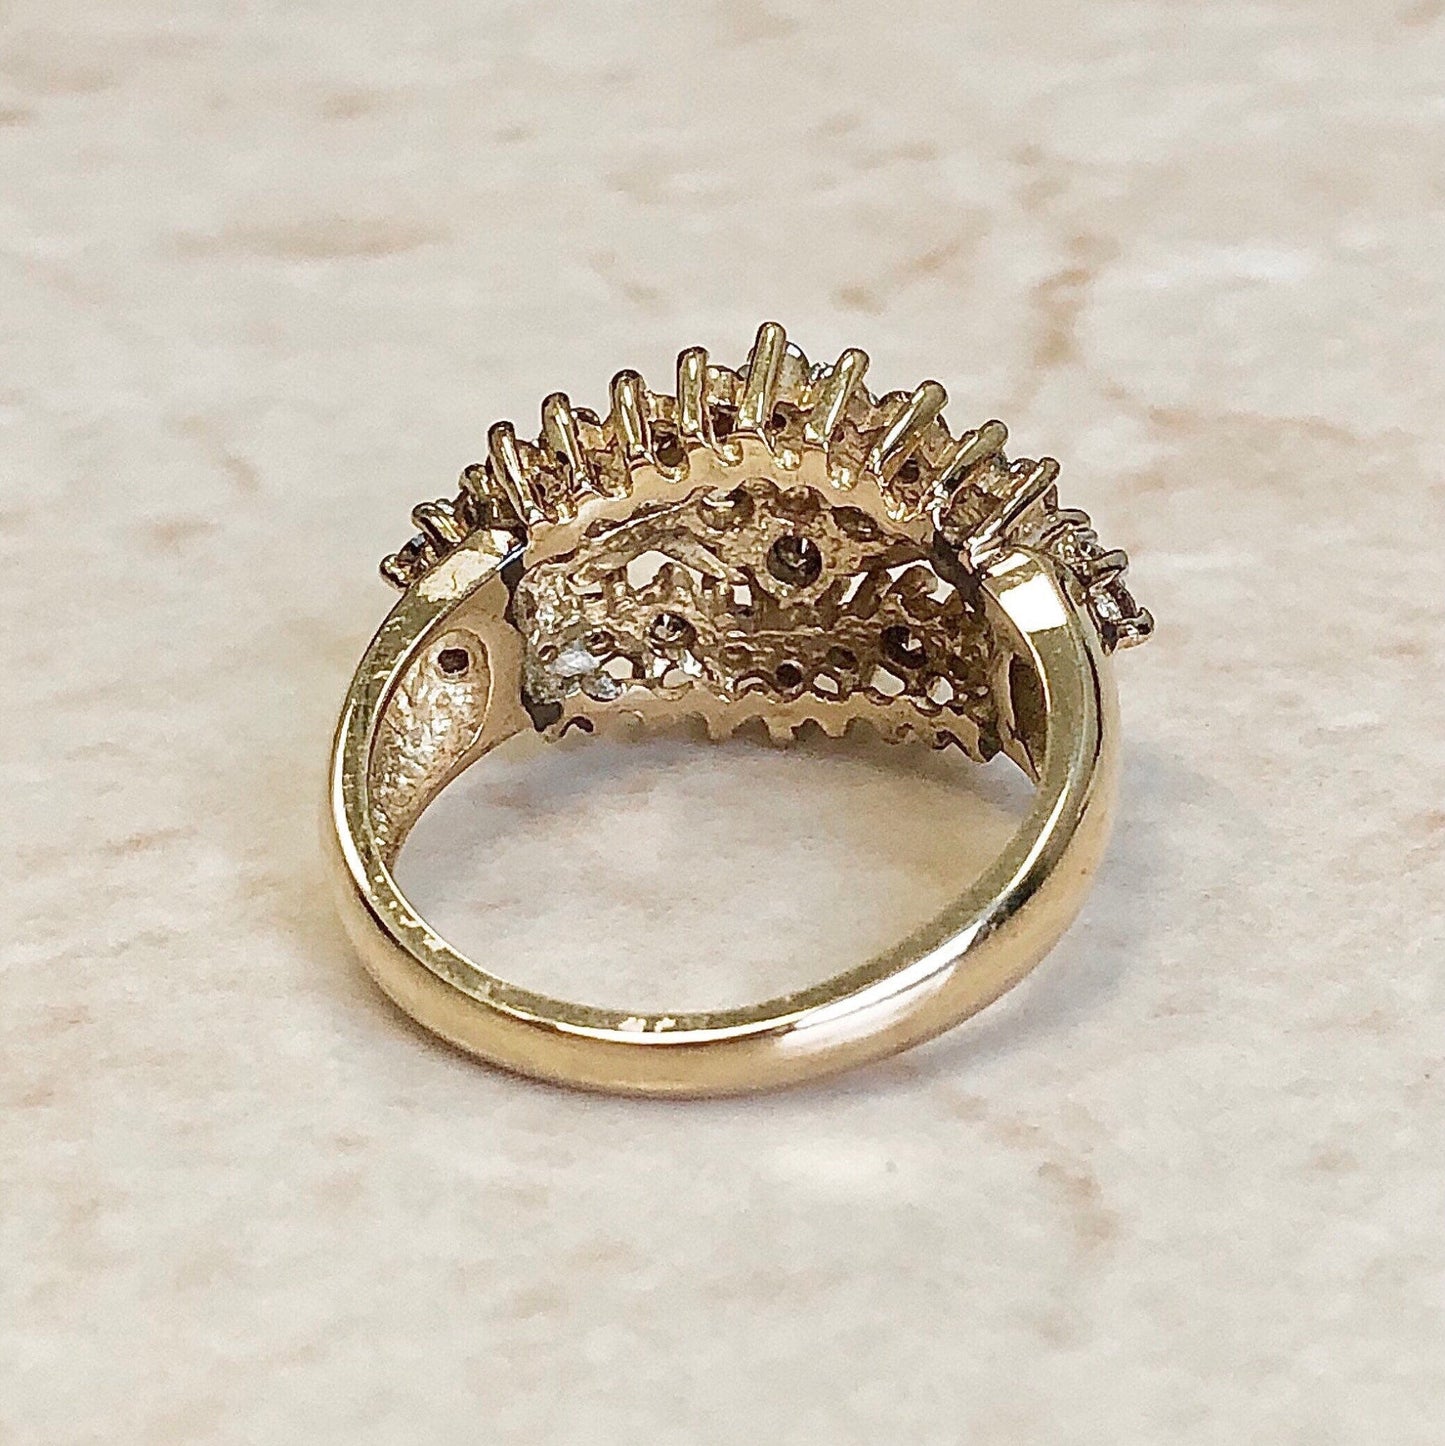 Vintage 10K Diamond Ring - Diamond Cocktail Ring 1.00 CTTW - Rose Gold - Mother’s Day Gift